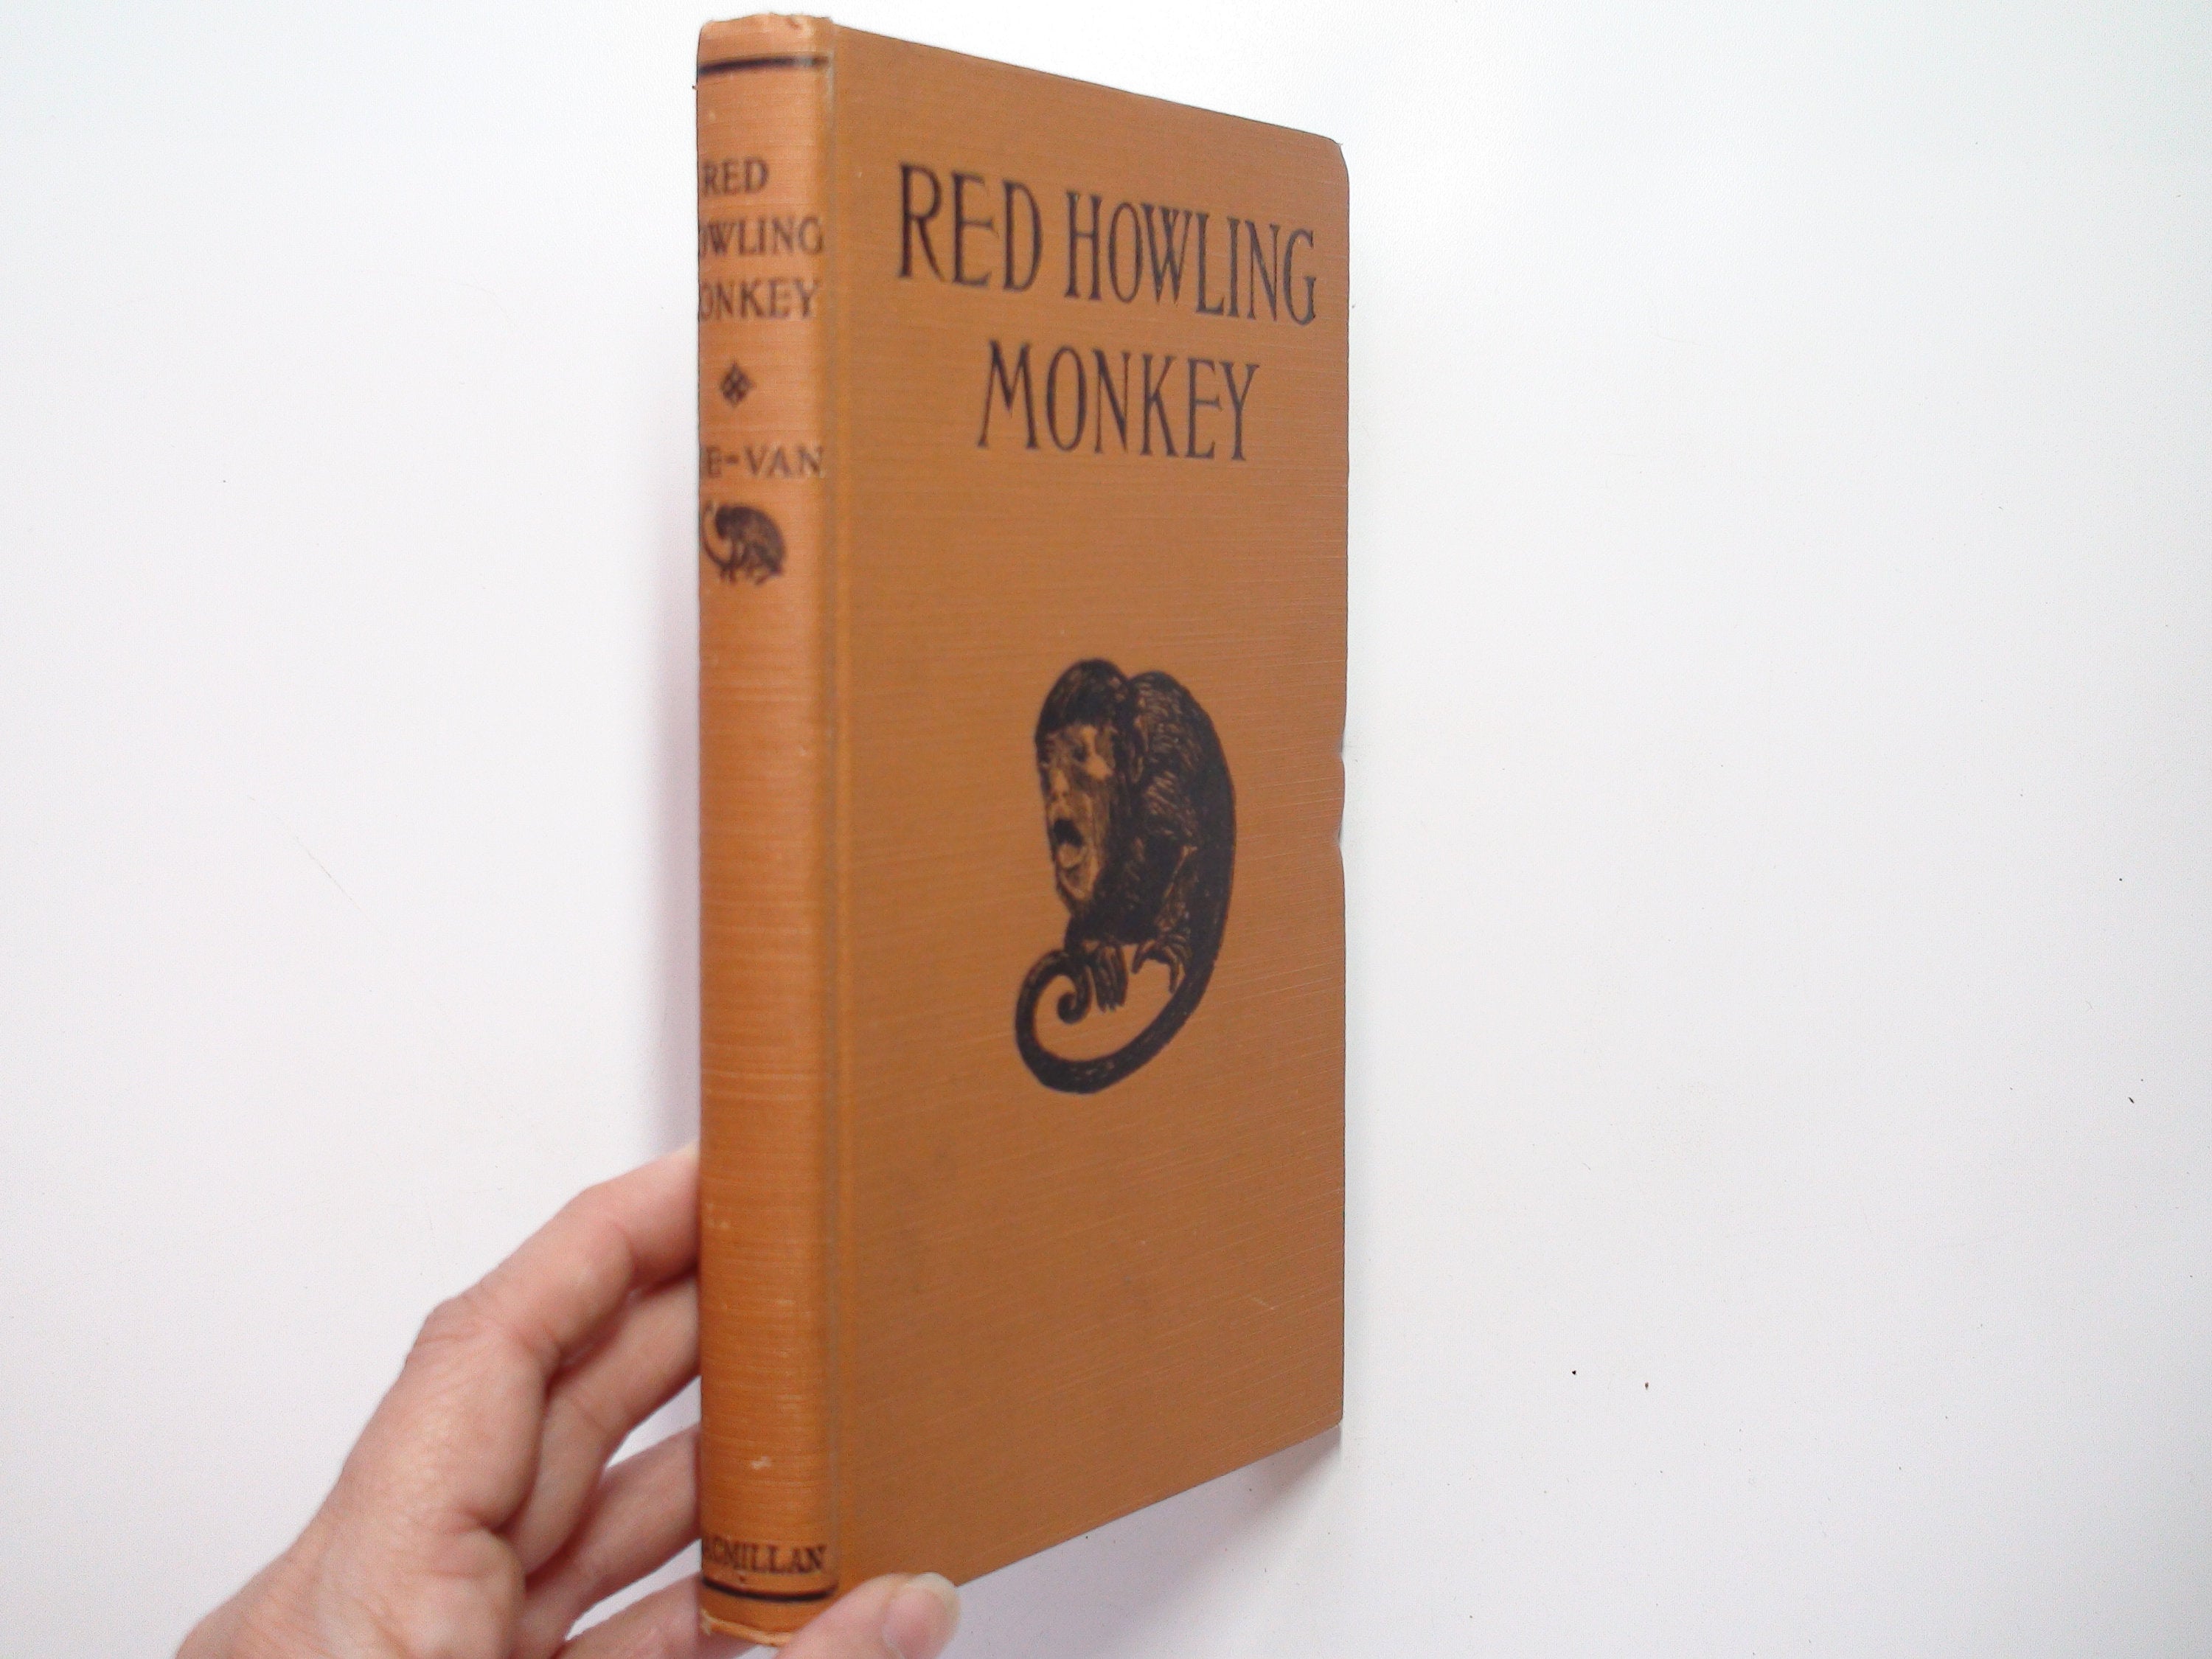 Red Howling Monkey Told and Illustrated By Helen Damrosch Tee-Van, 1st Ed, 1926